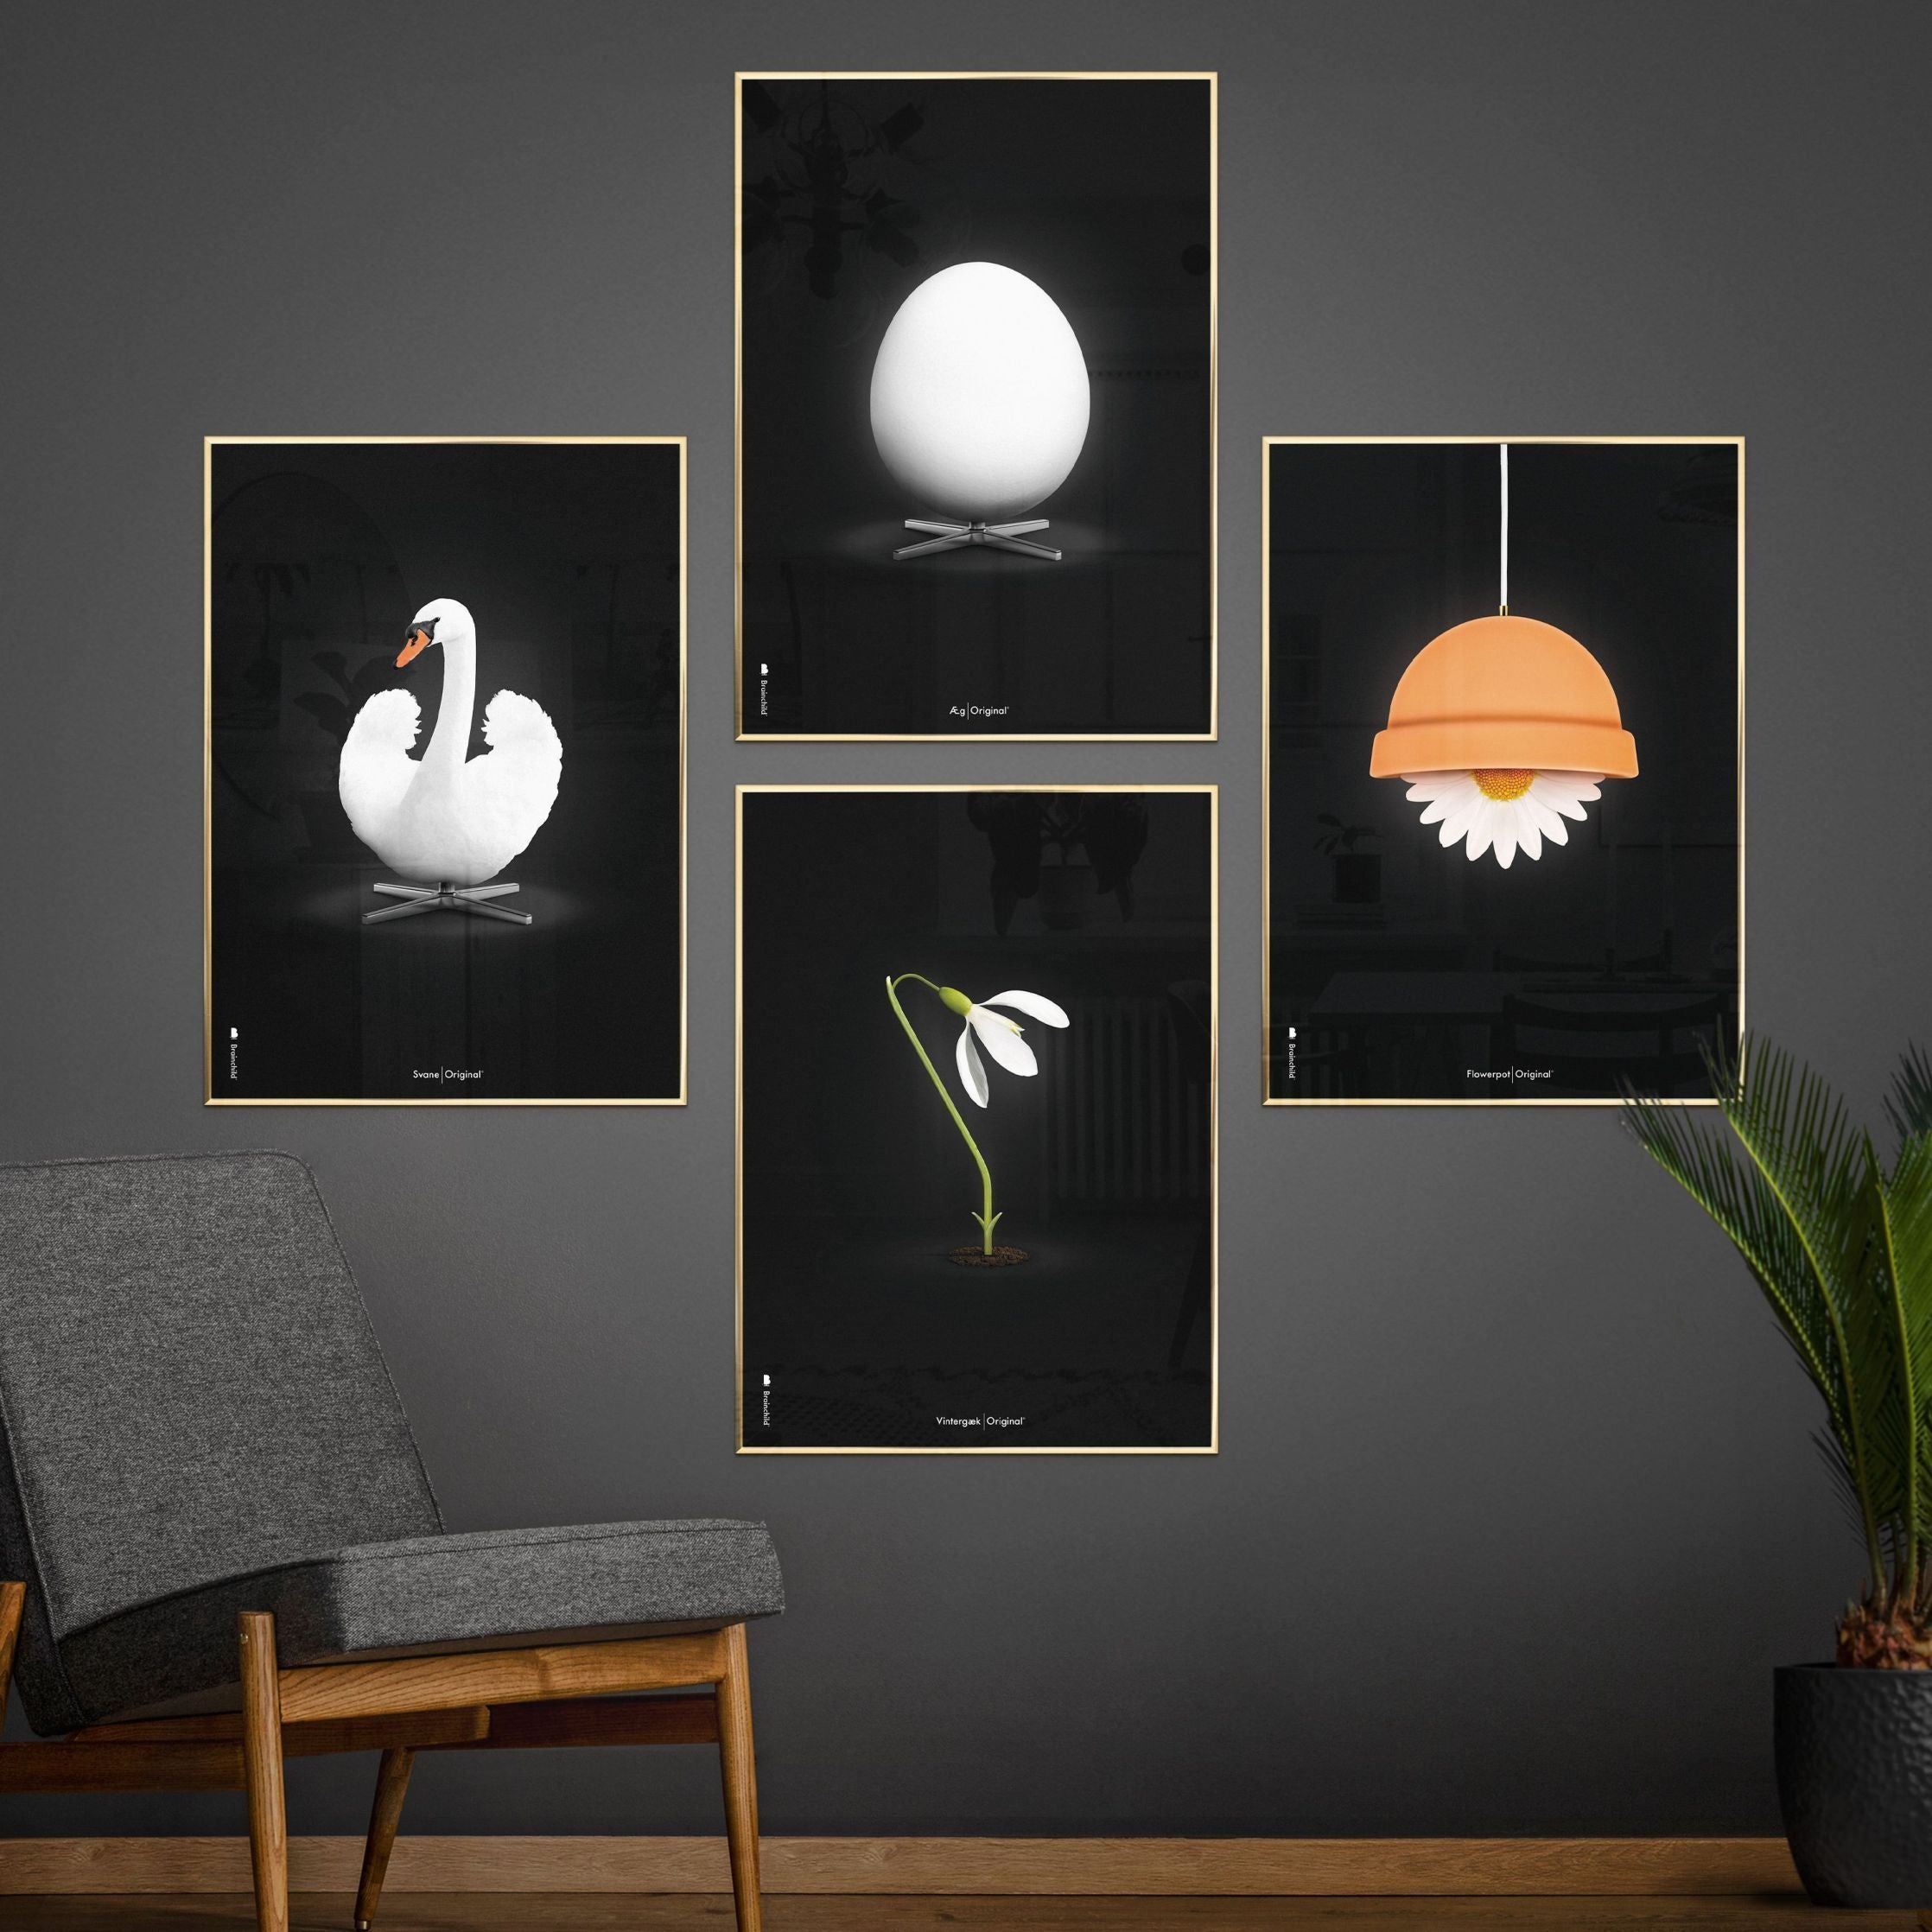 Brainchild Snowdrop Classic Poster Without Frame 30x40 Cm, Black Background